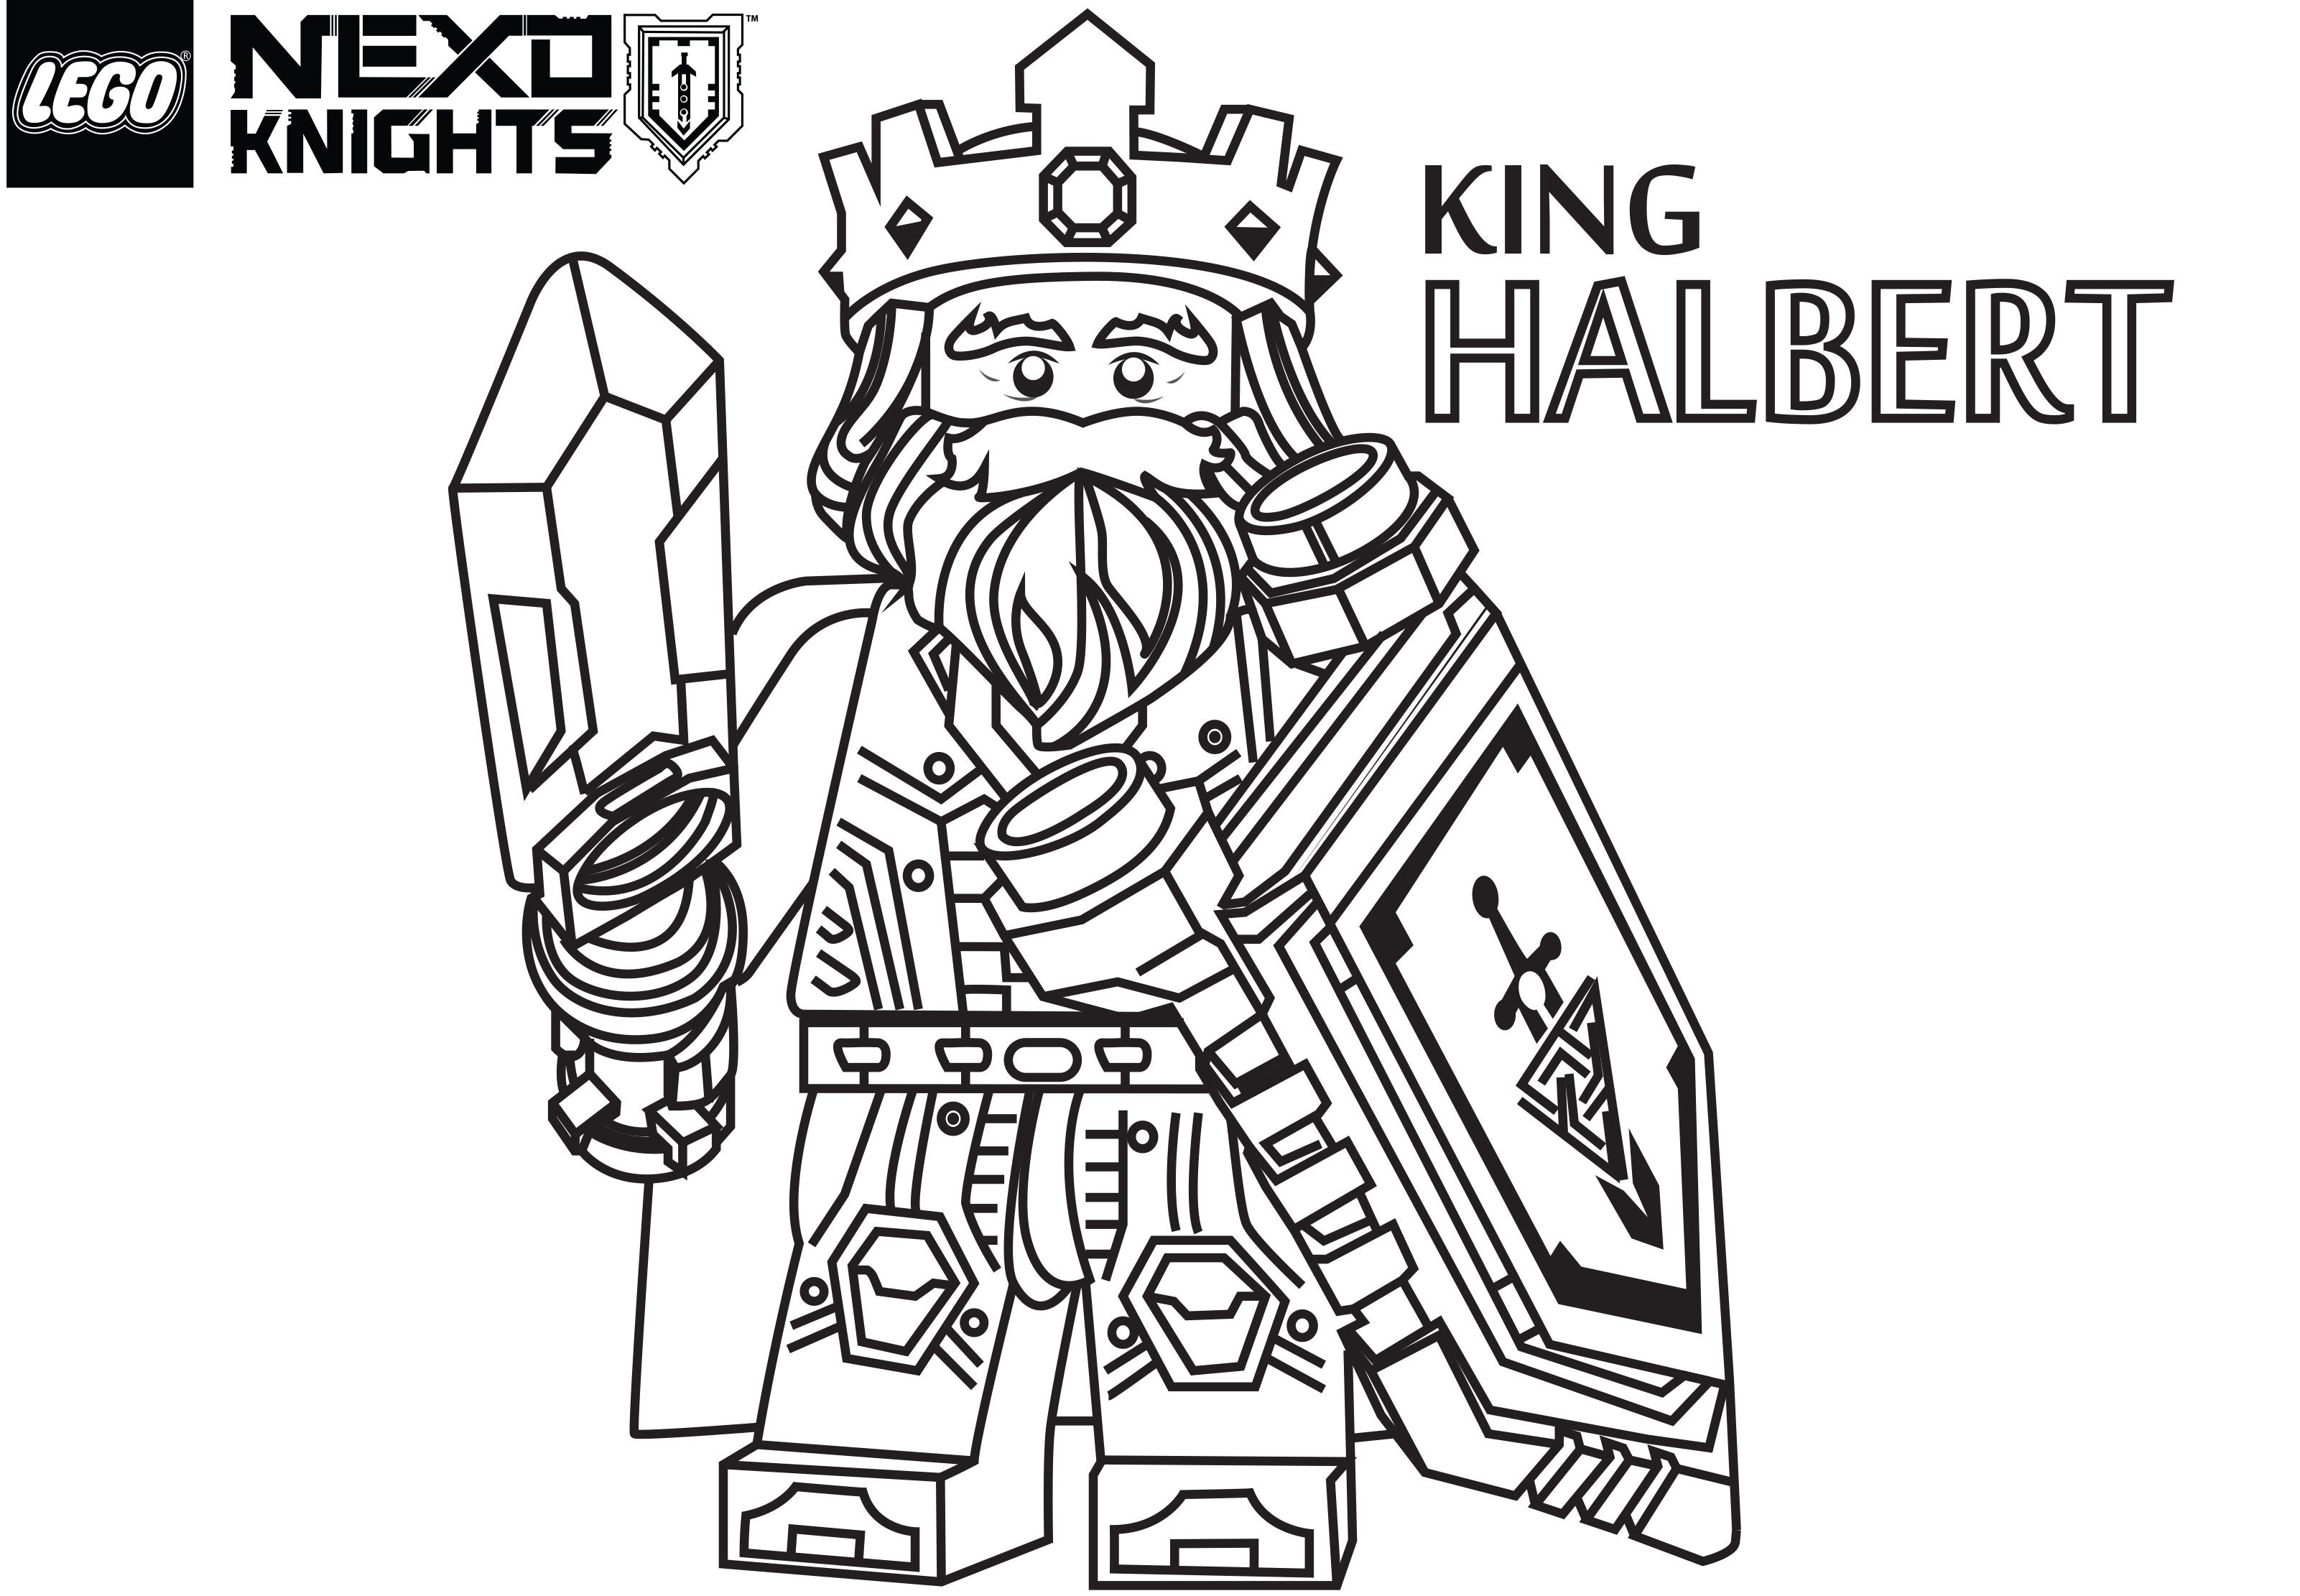 Lego Nexo Knights Coloring Pages : Free Printable Lego Nexo